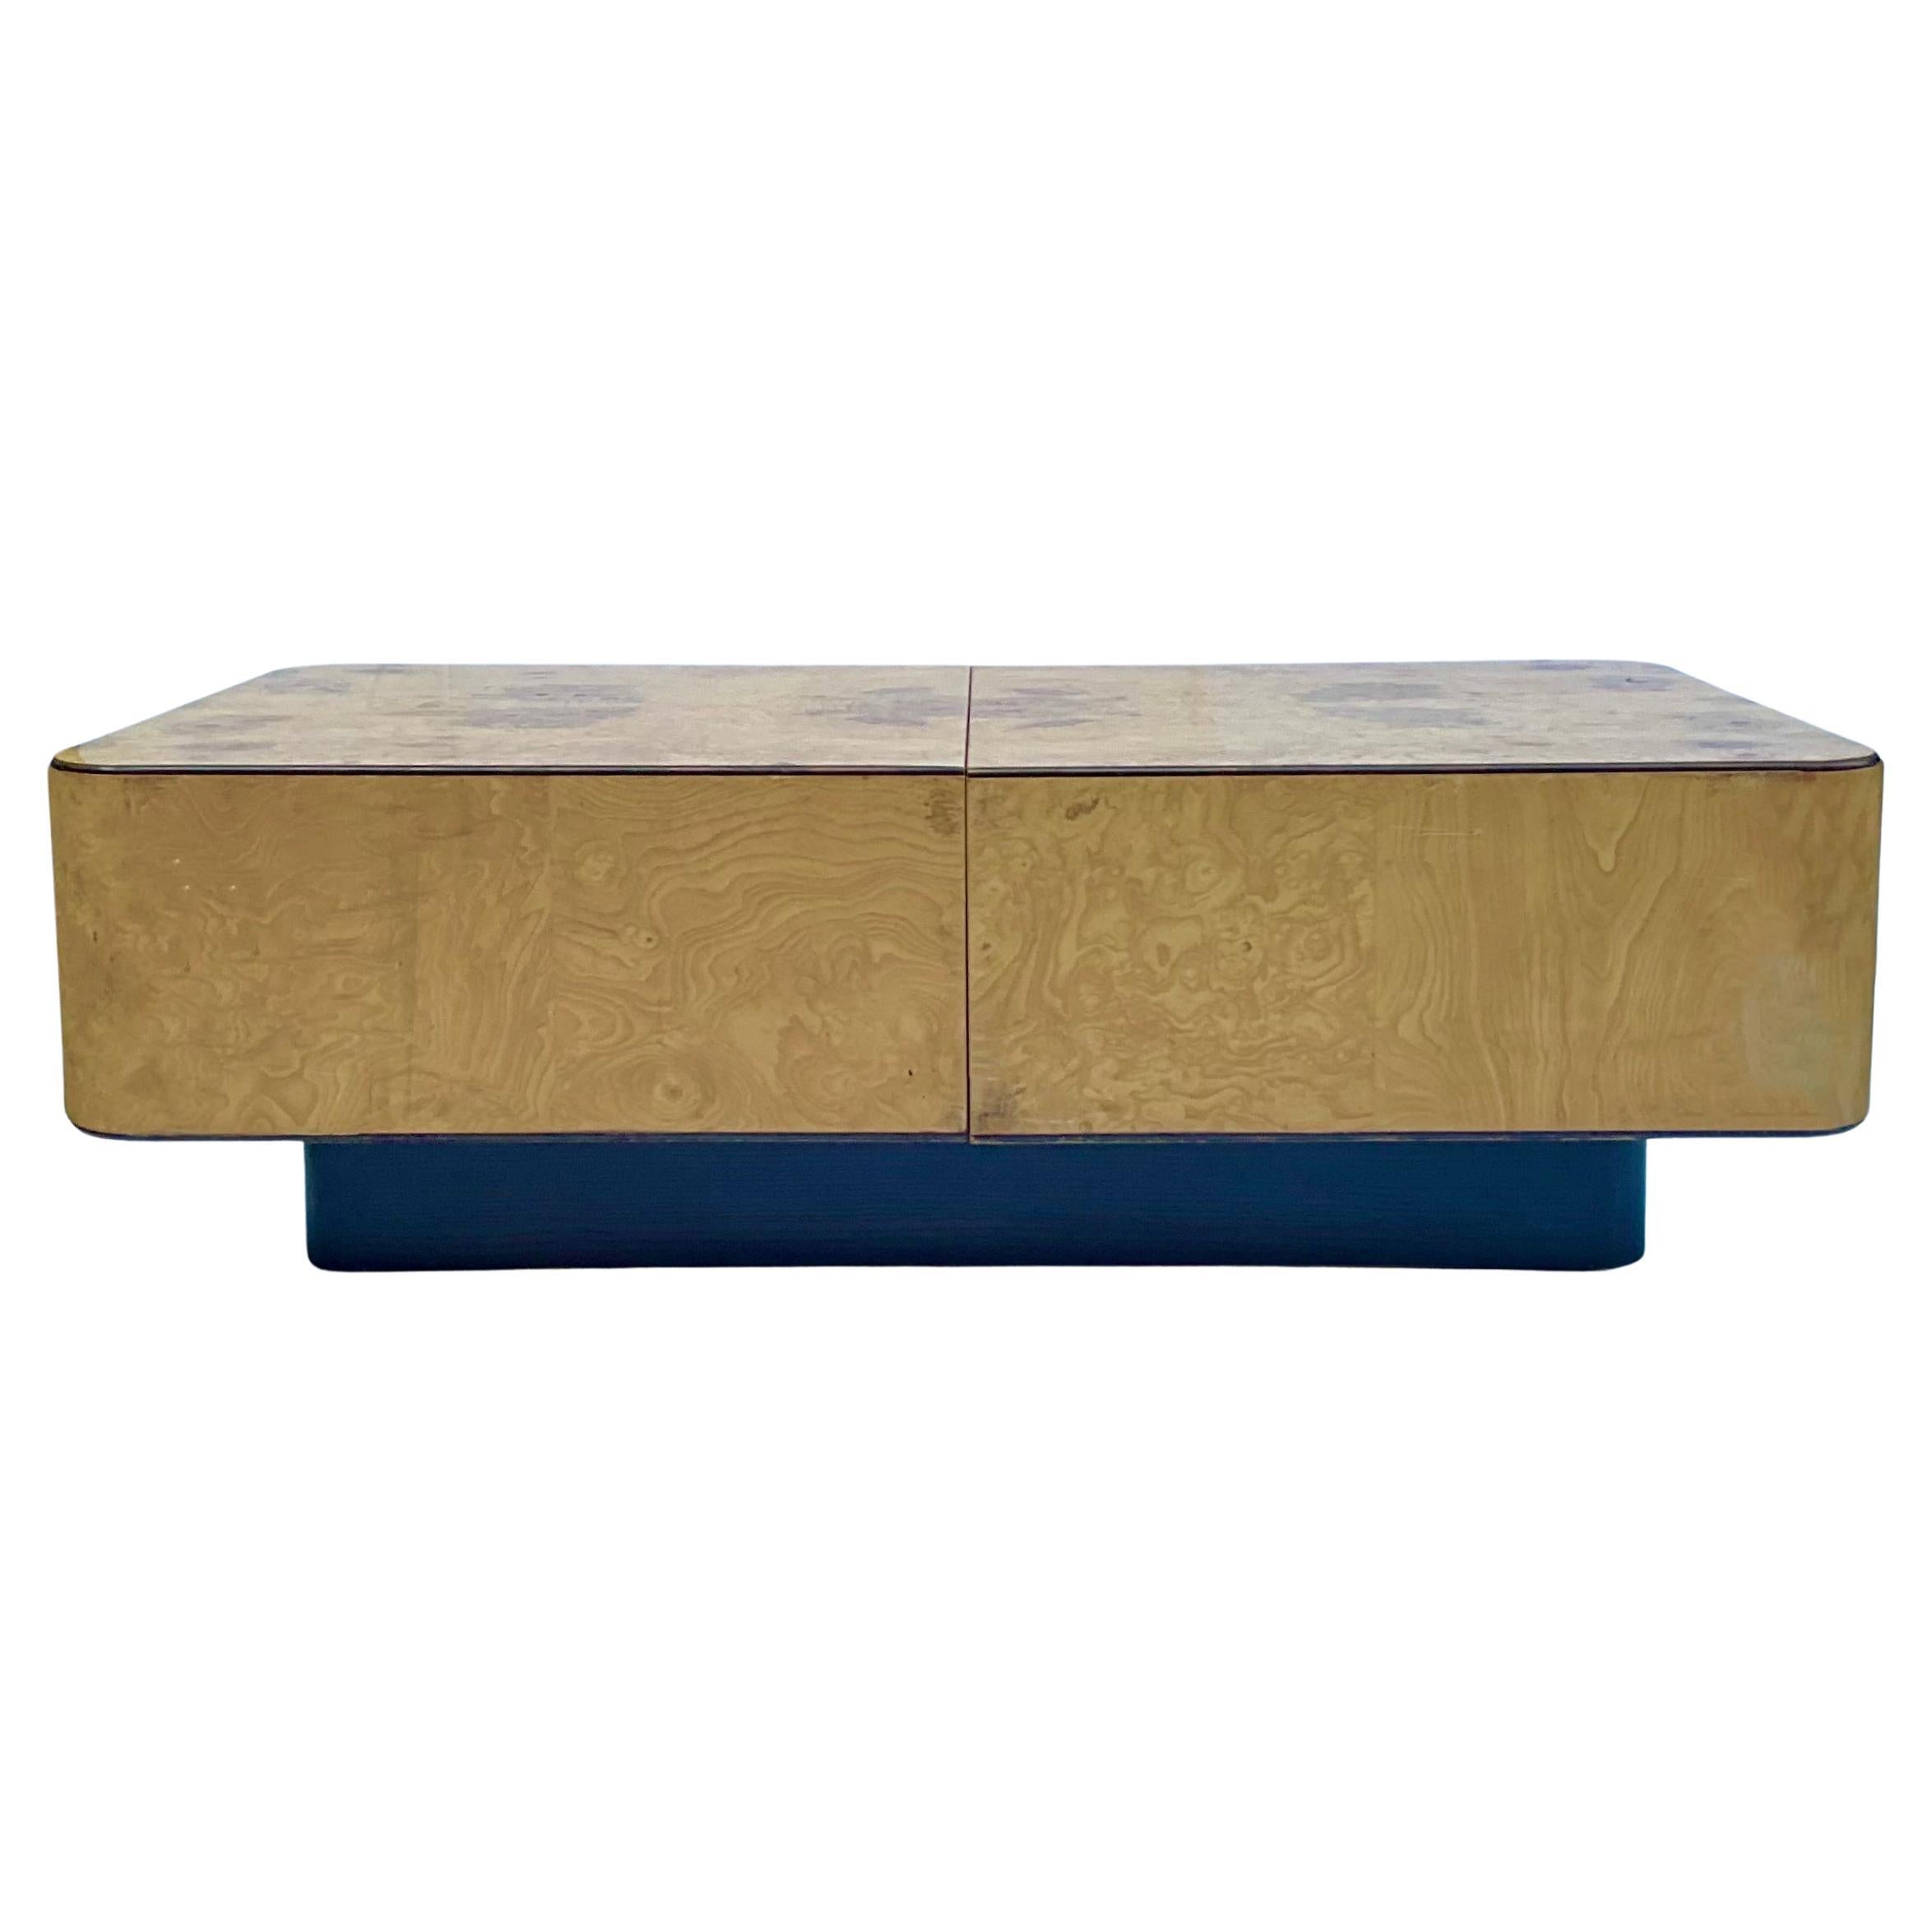 1970s Modern Burl Floating Coffee Table With Storage Styled After Milo Baughman  For Sale